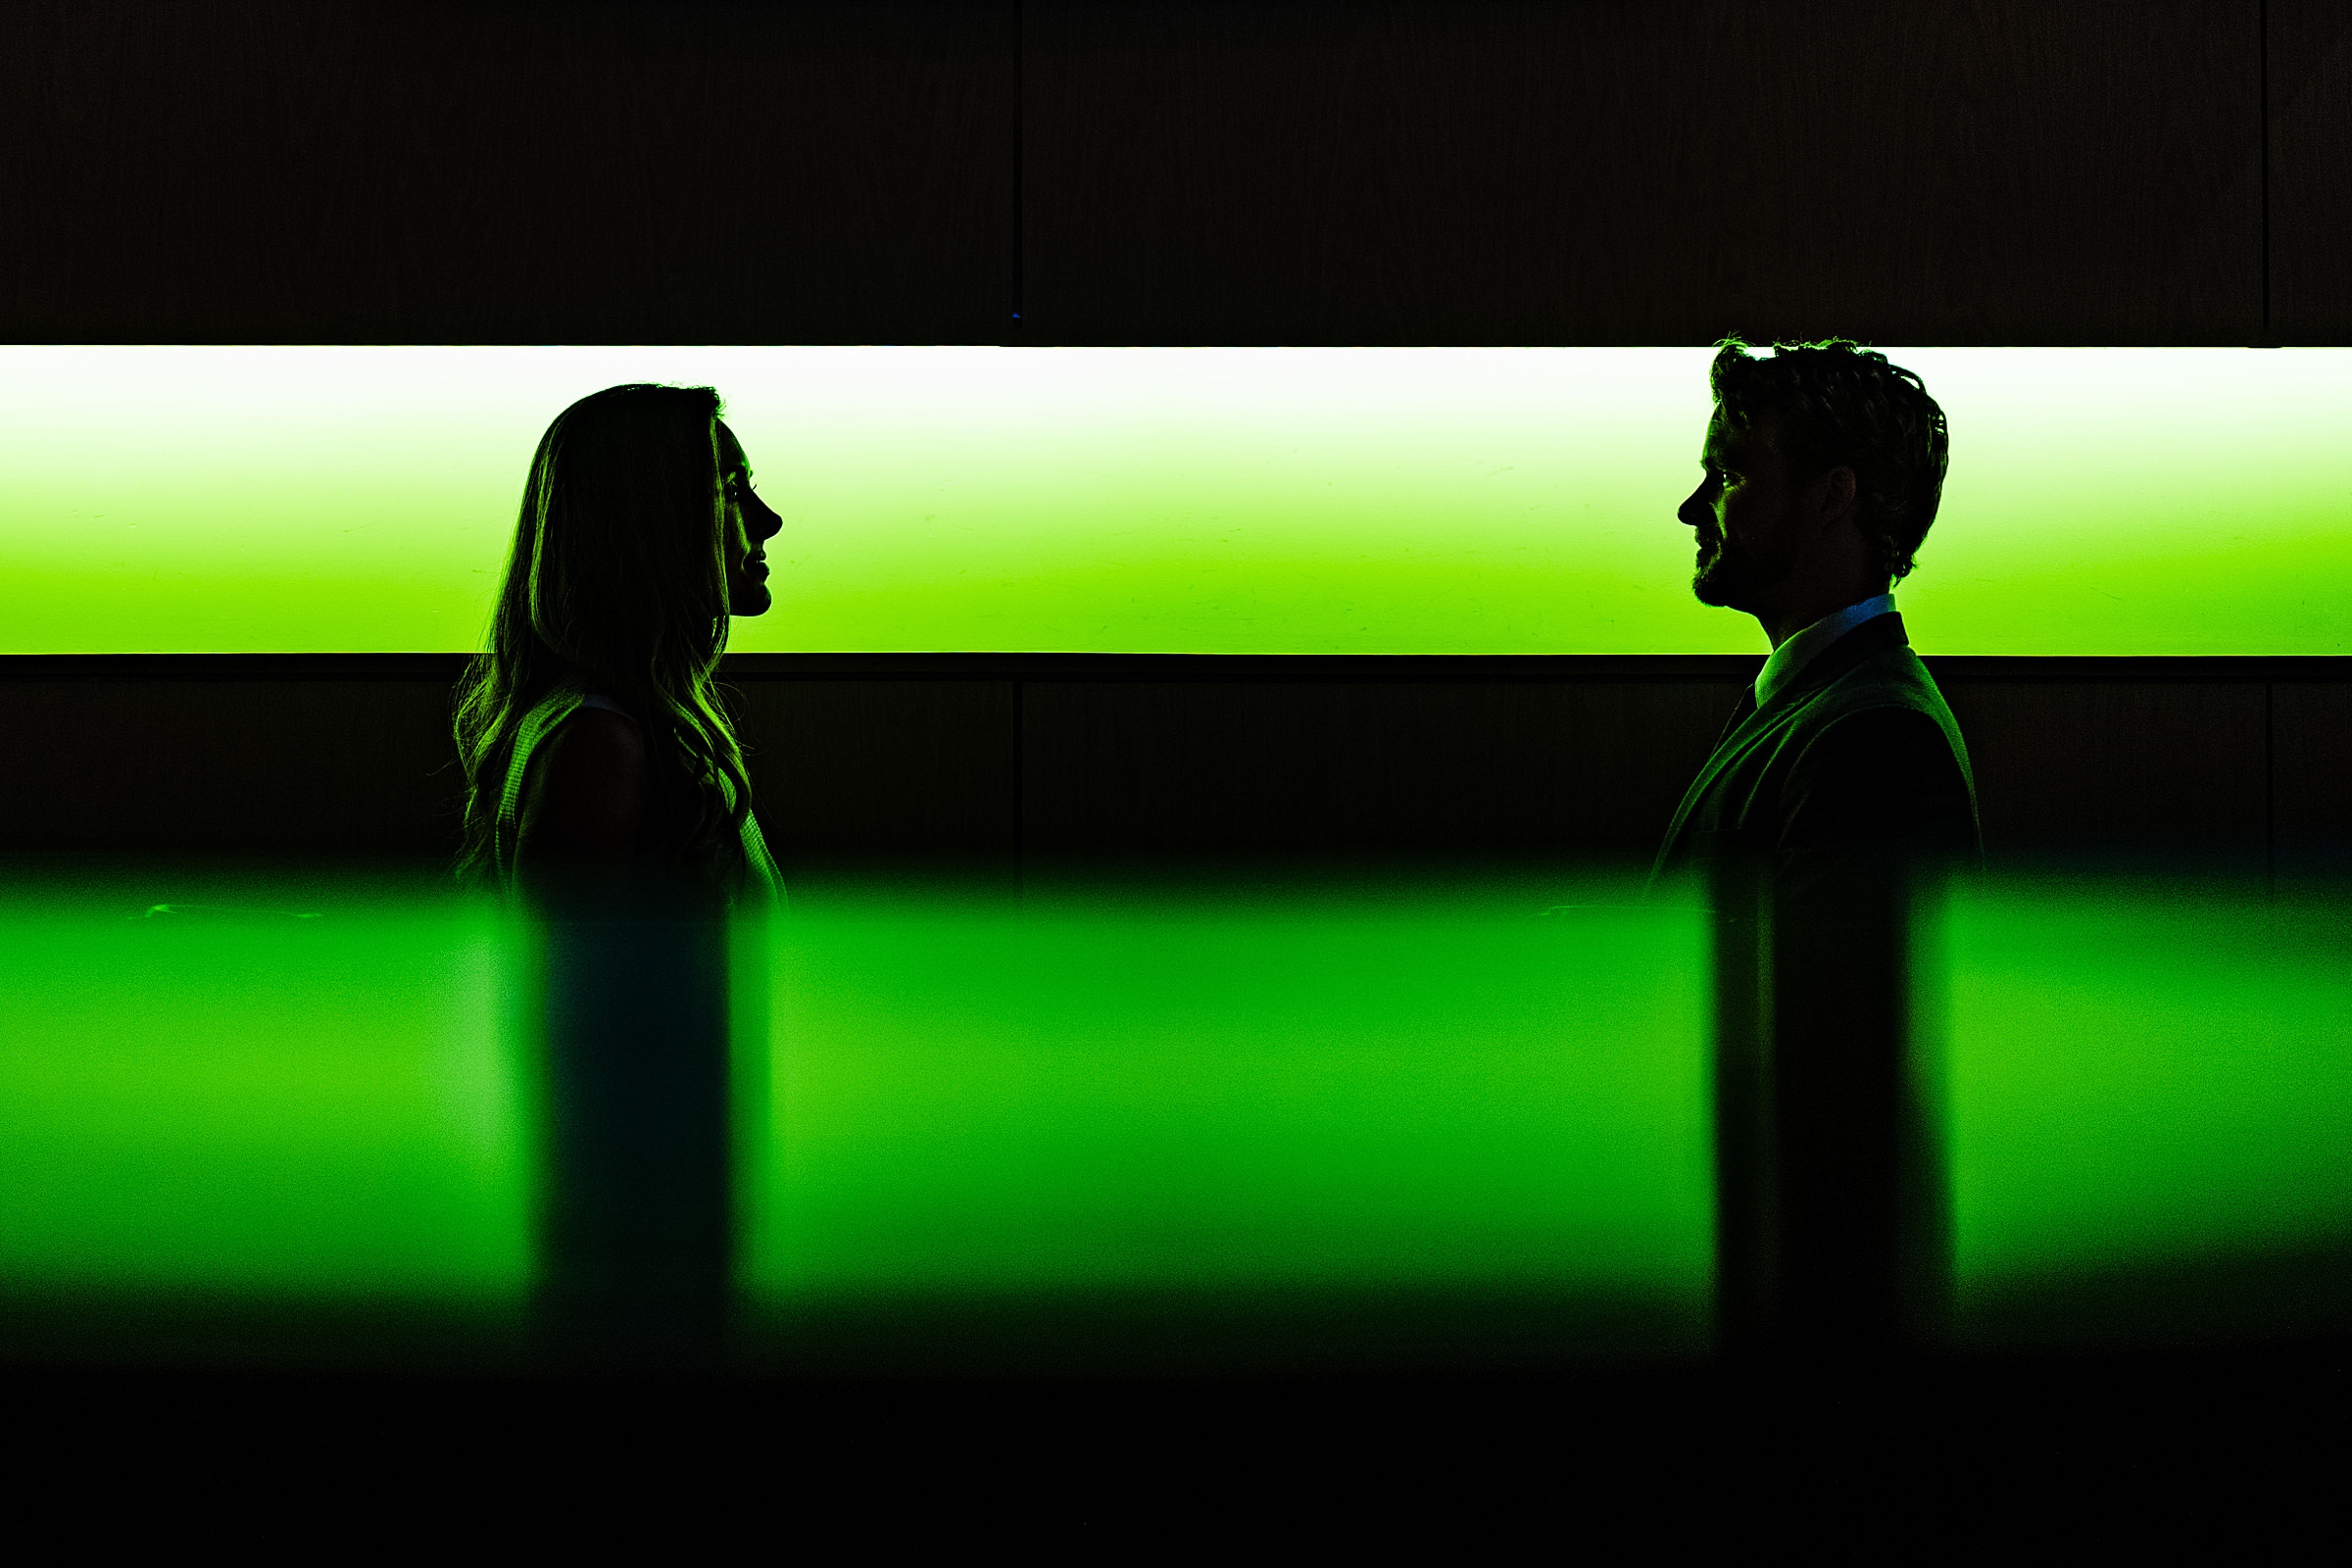 Creative and dramatic portrait of wedding couple with a green background and reflection | kivusandcamera.com